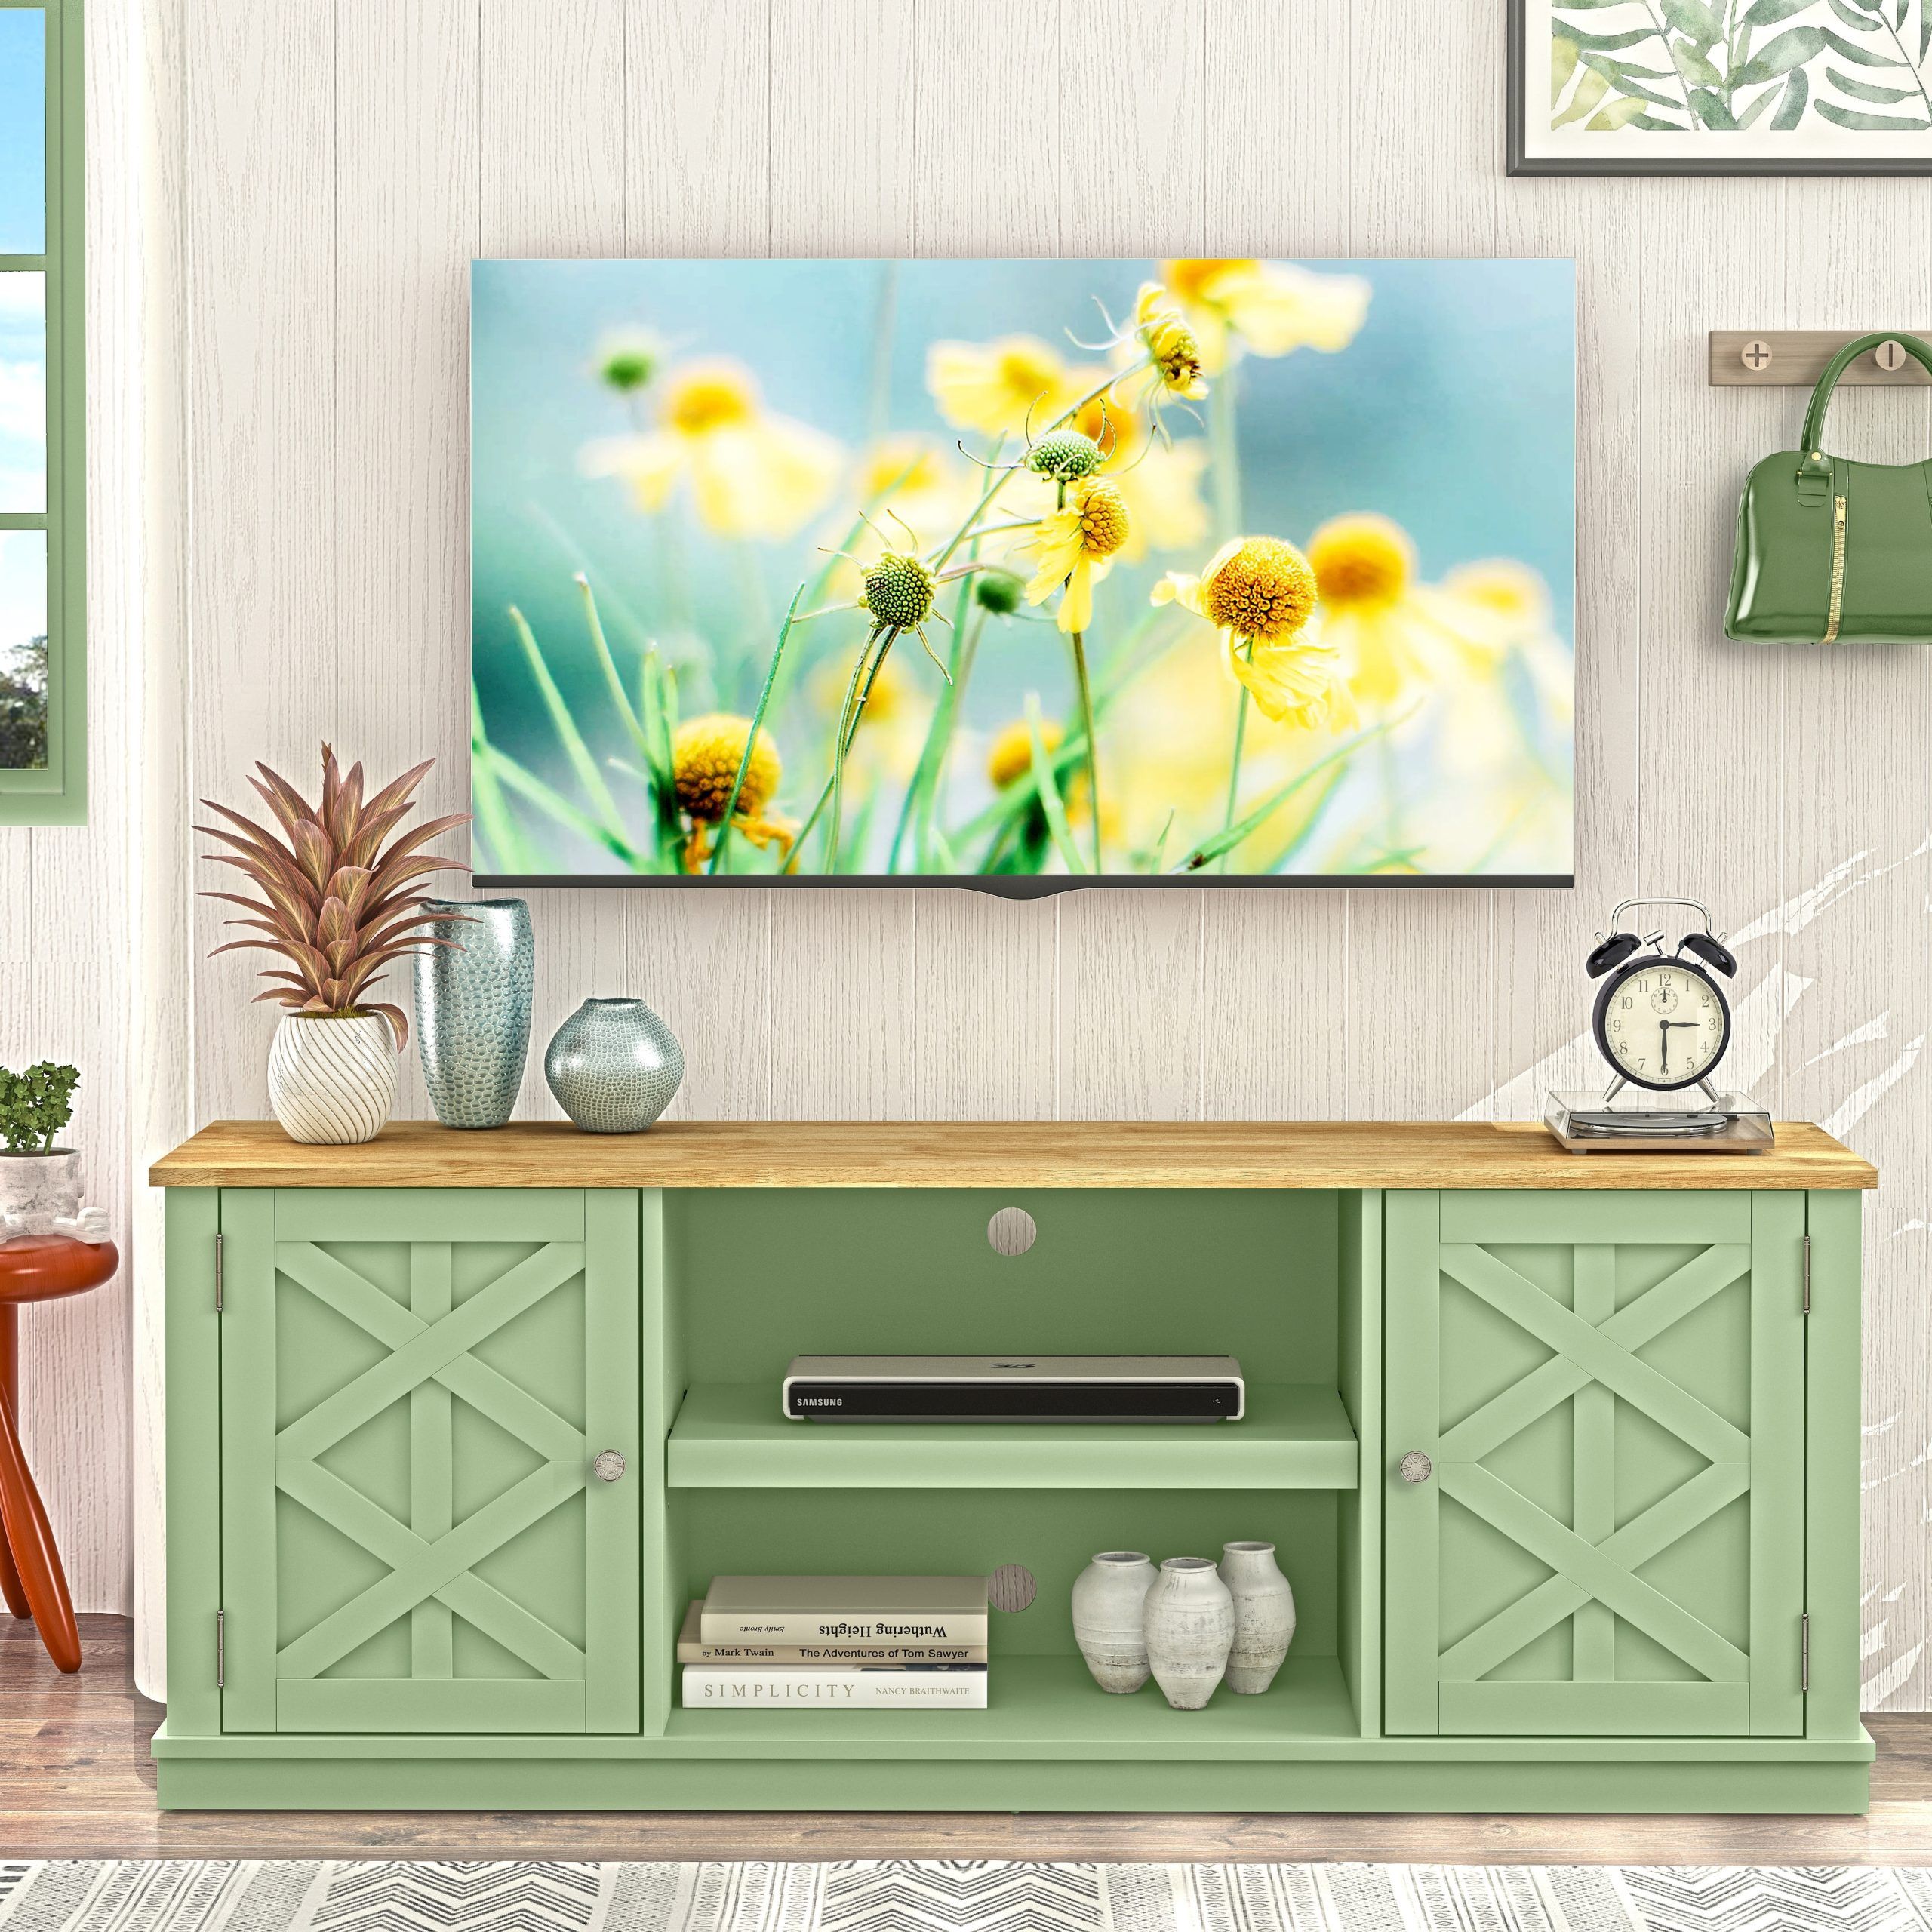 64" Farmhouse Tv Stand Console For Tvs Up To 70 Inch – 64" In Width – Bed  Bath & Beyond – 36784650 Within Farmhouse Tv Stands For 70 Inch Tv (View 14 of 15)